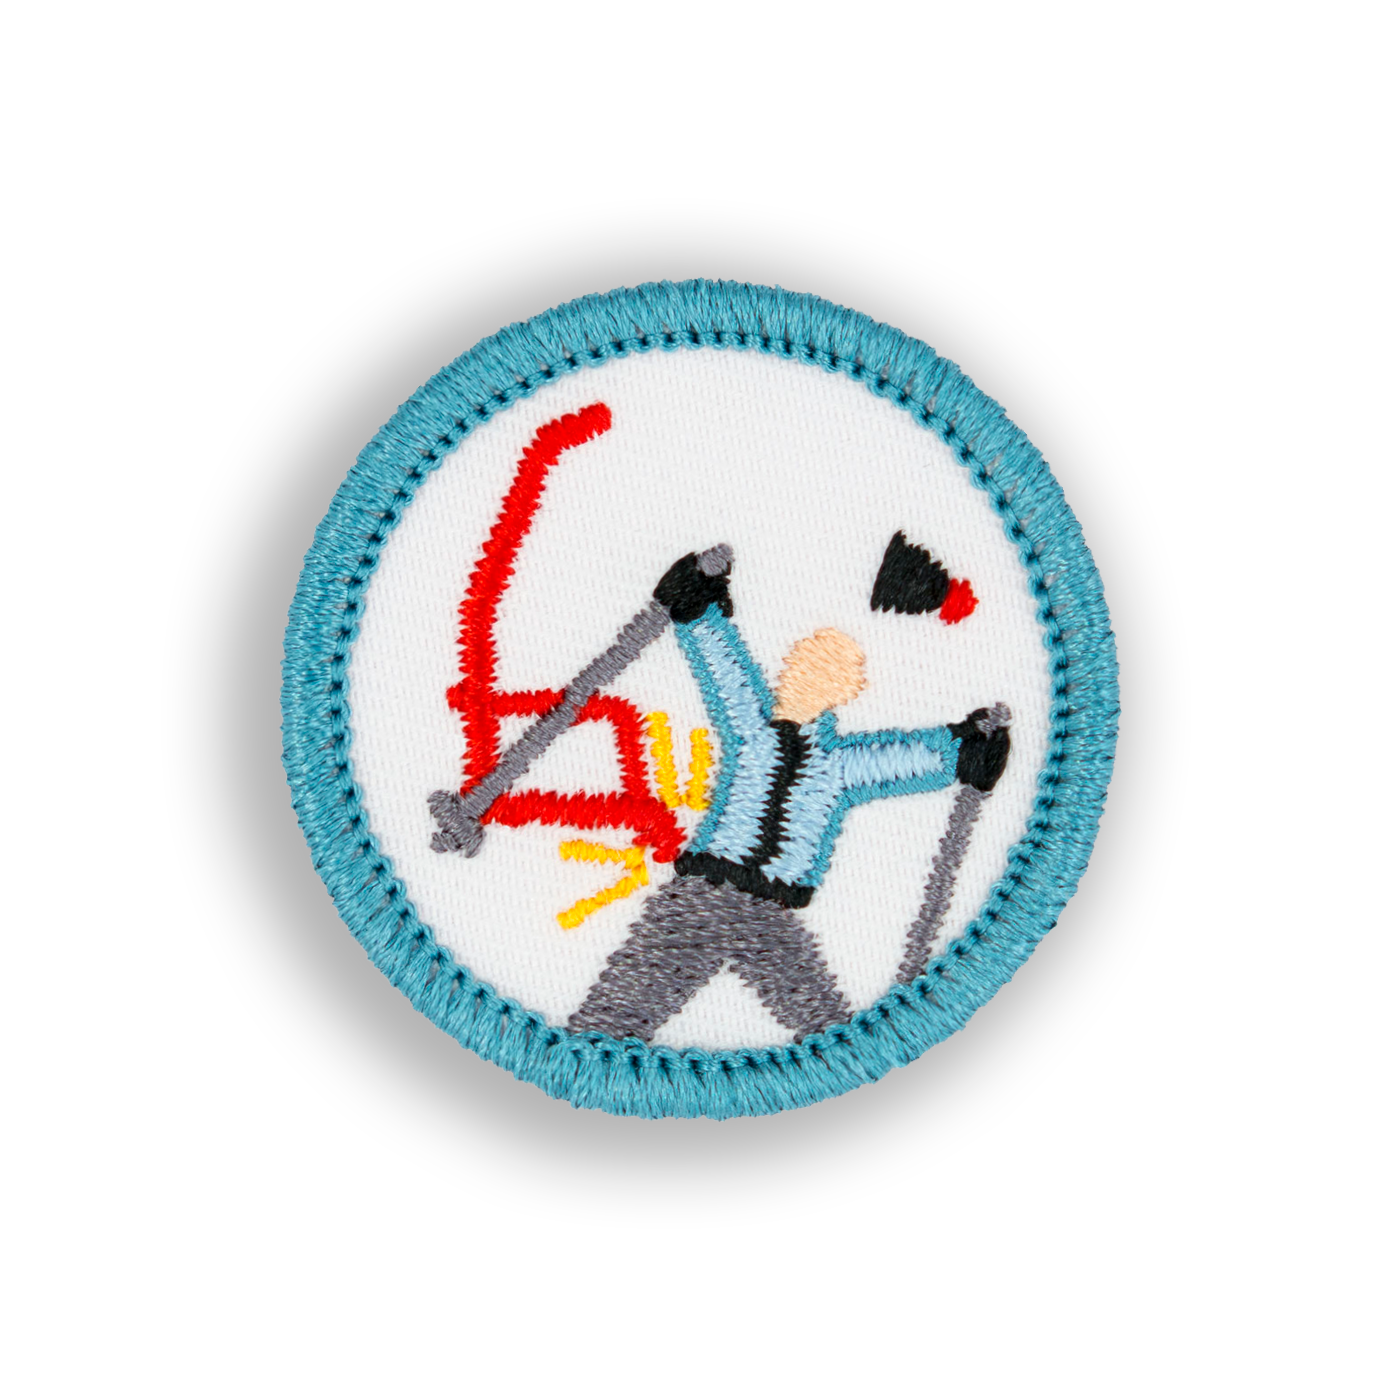 Chairlift Issues Patch | Demerit Wear - Fake Merit Badges